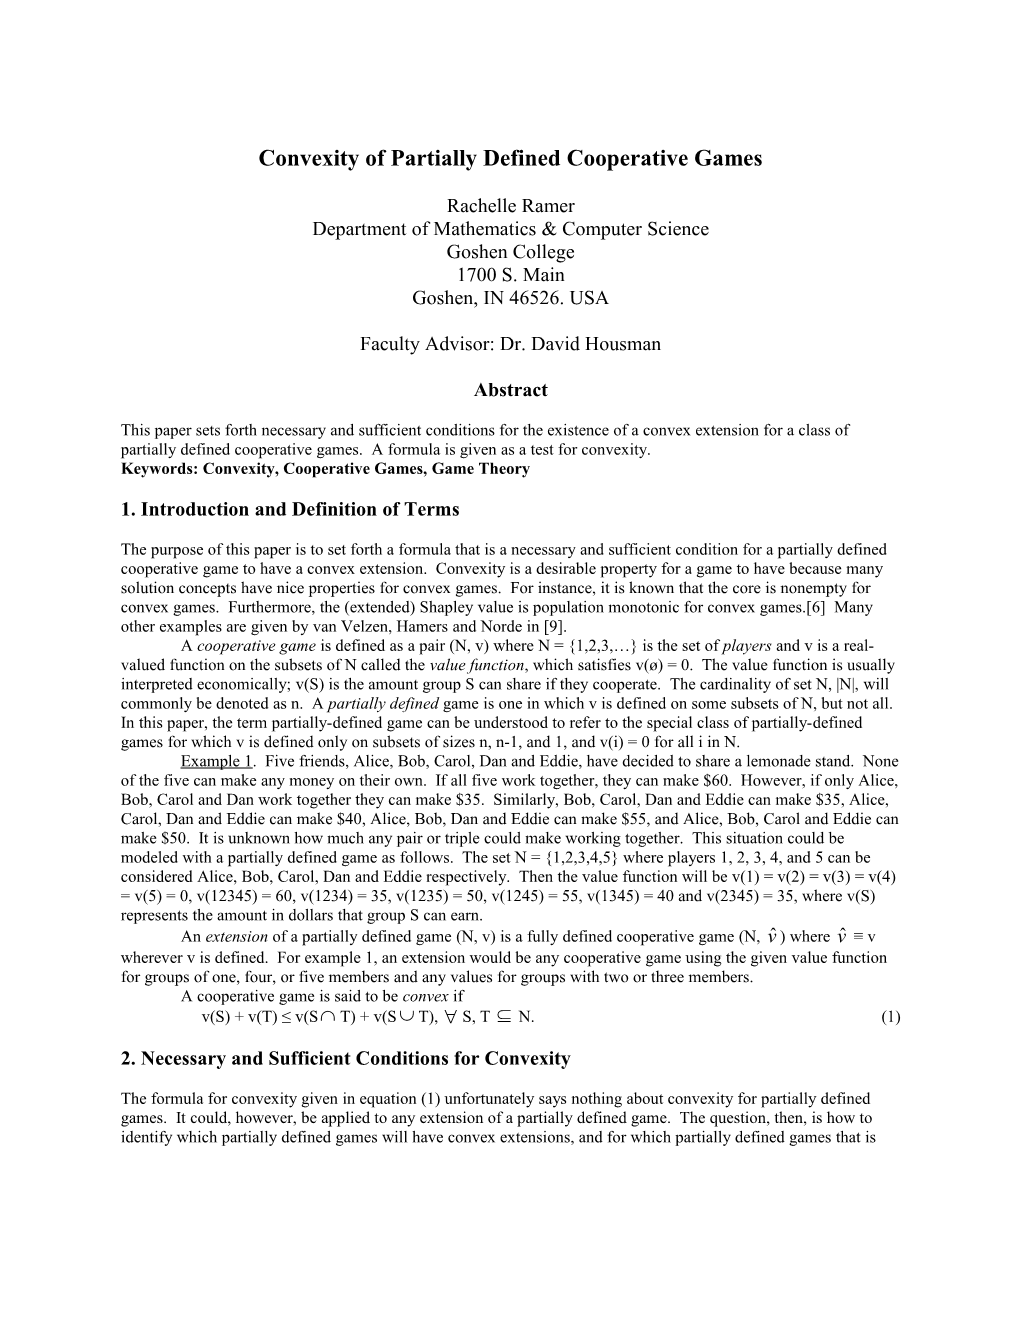 Convexity of Partially-Defined Cooperative Games